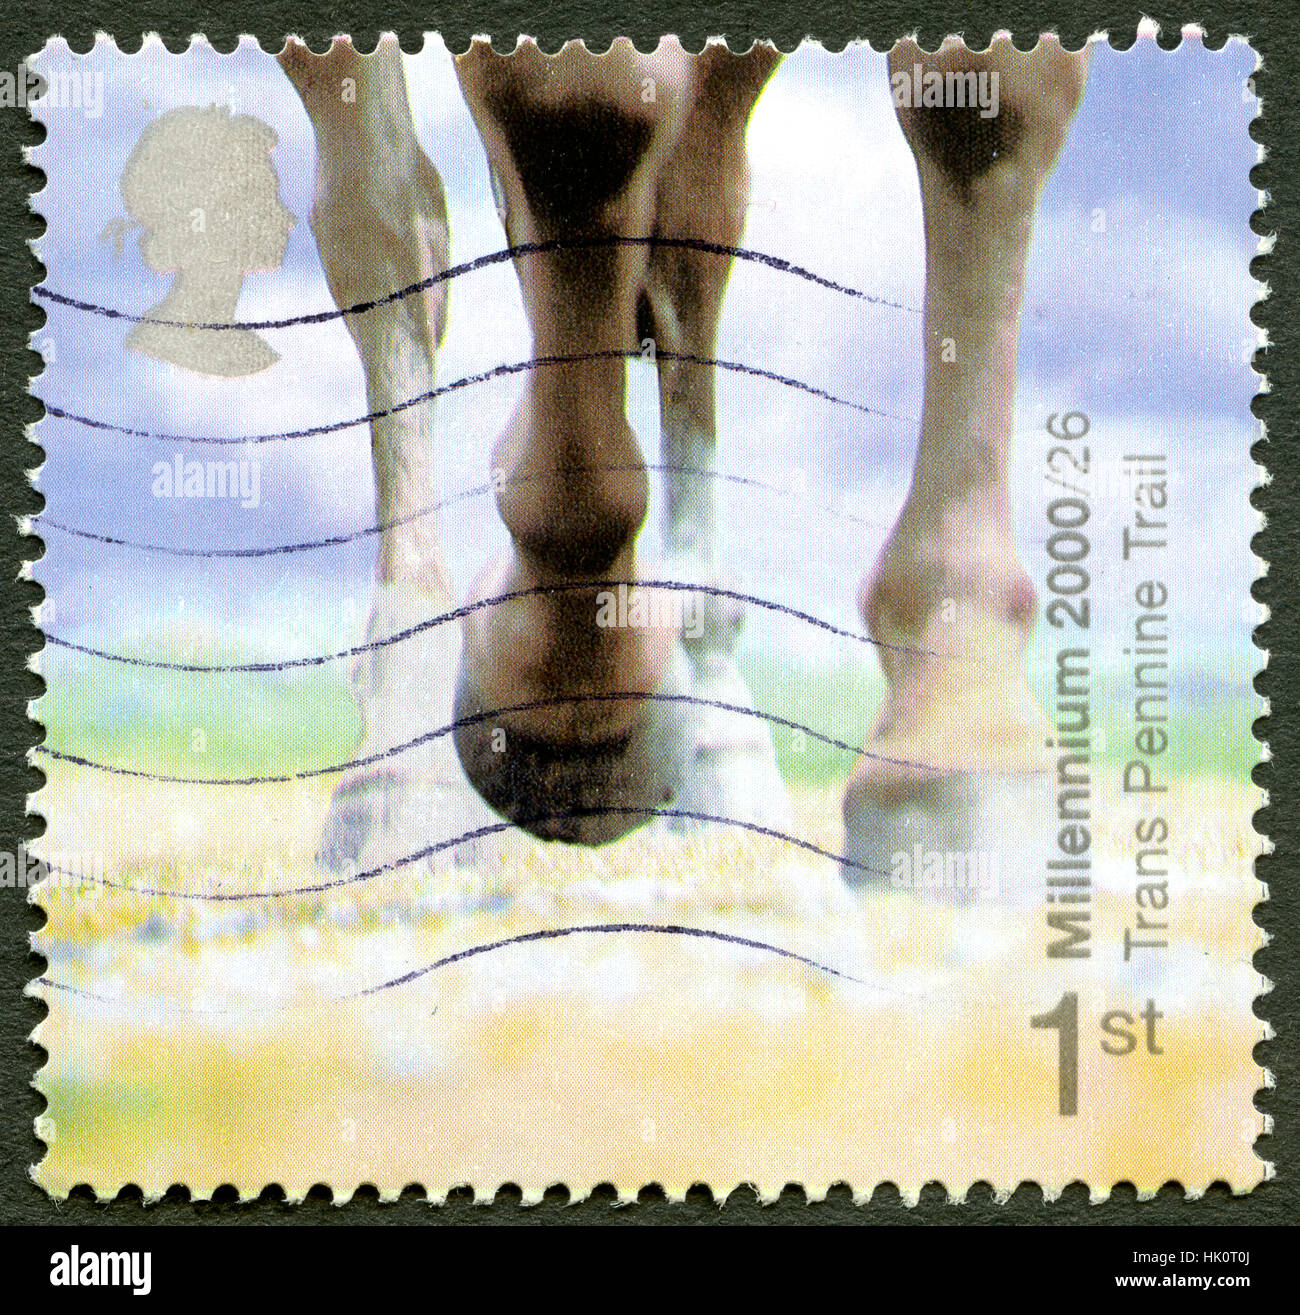 UK - CIRCA 2000: A used postage stamp from the UK, commemorating the Trans Pennine Trail in Northern England. Stock Photo